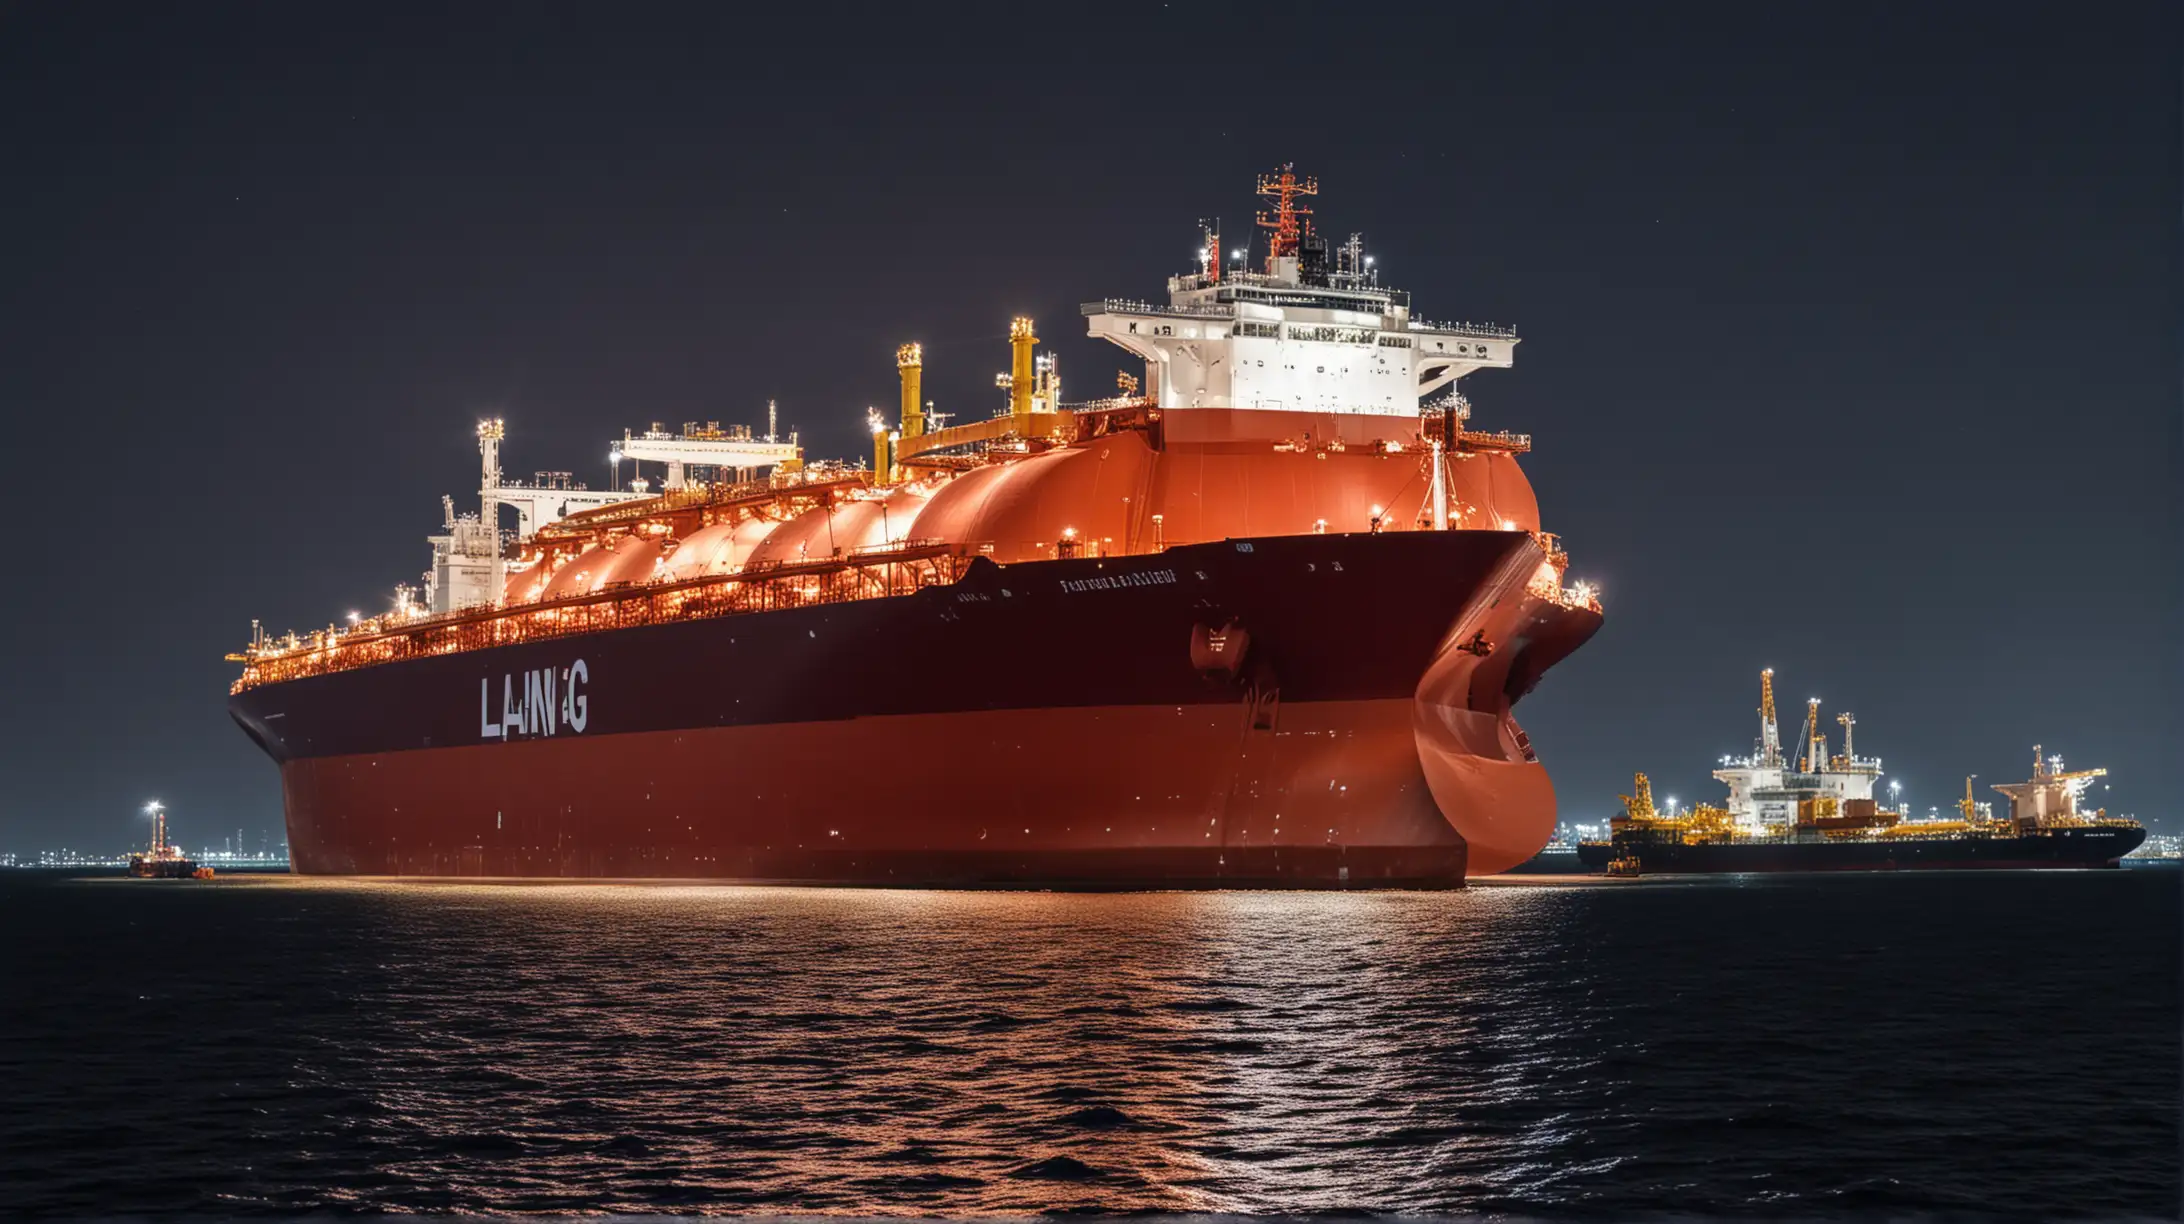 Massive Red LNG Ship at Night with Oil Barrels